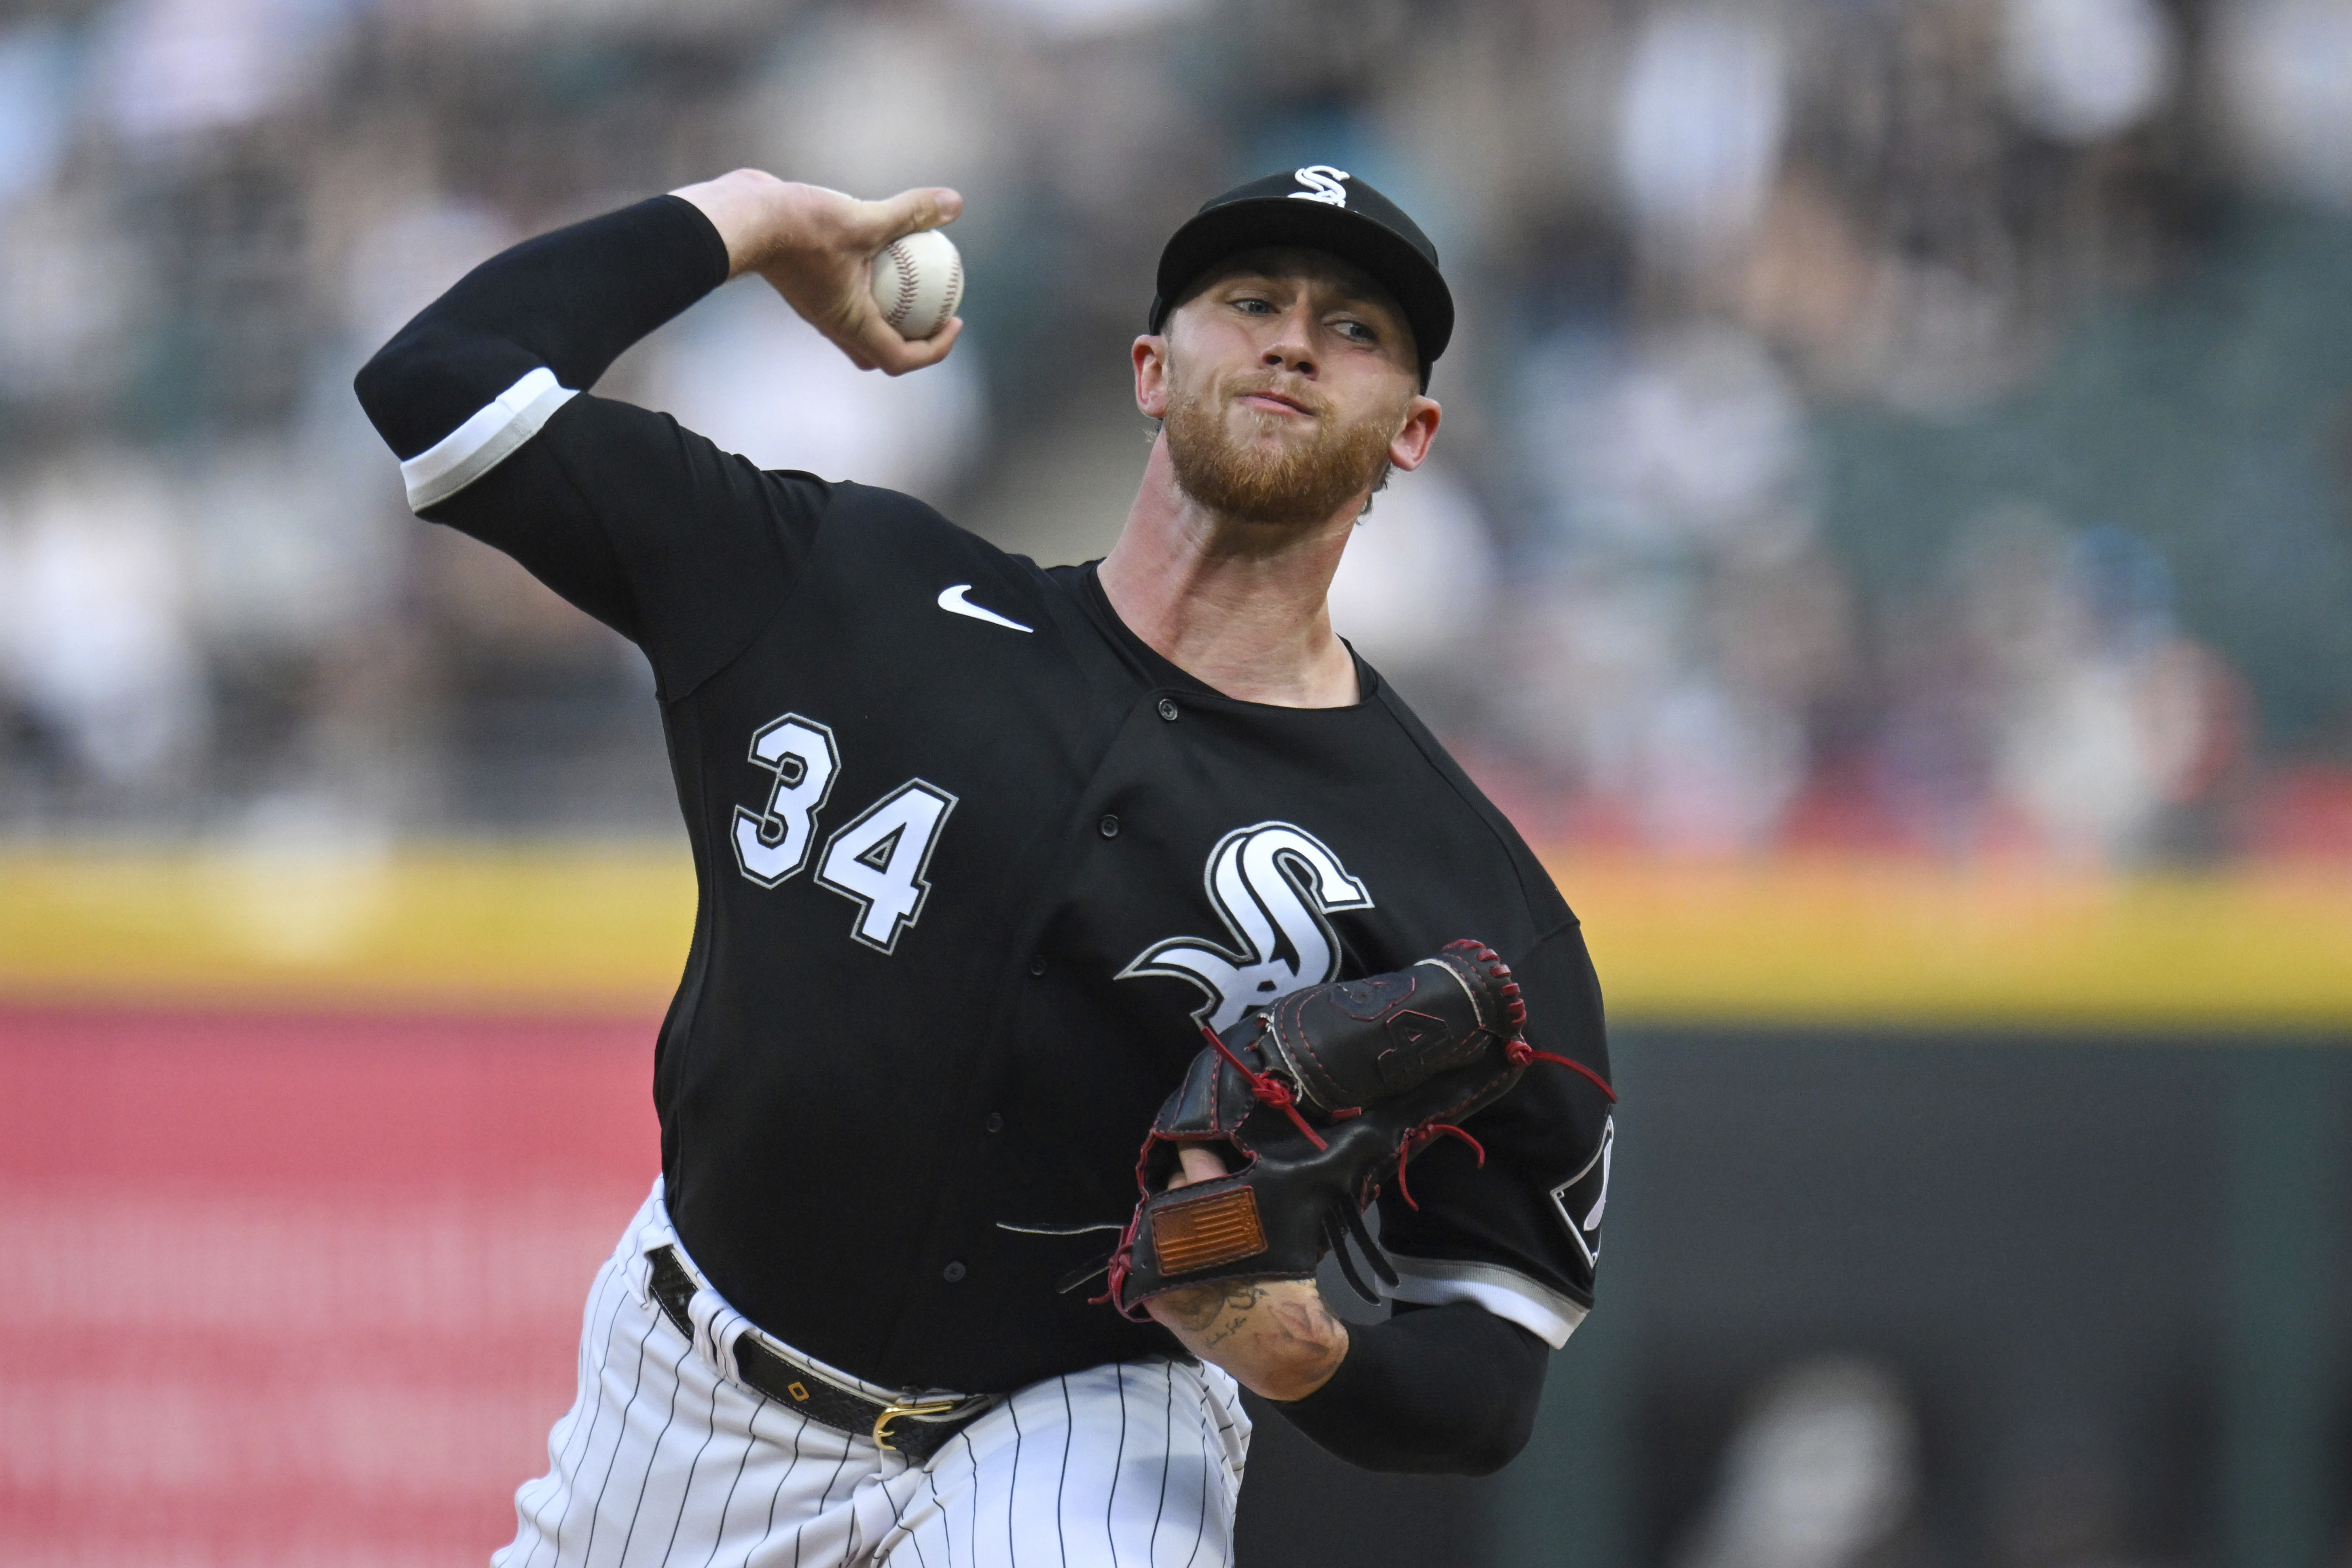 Michael Kopech says 'It's tough right now' after White Sox latest